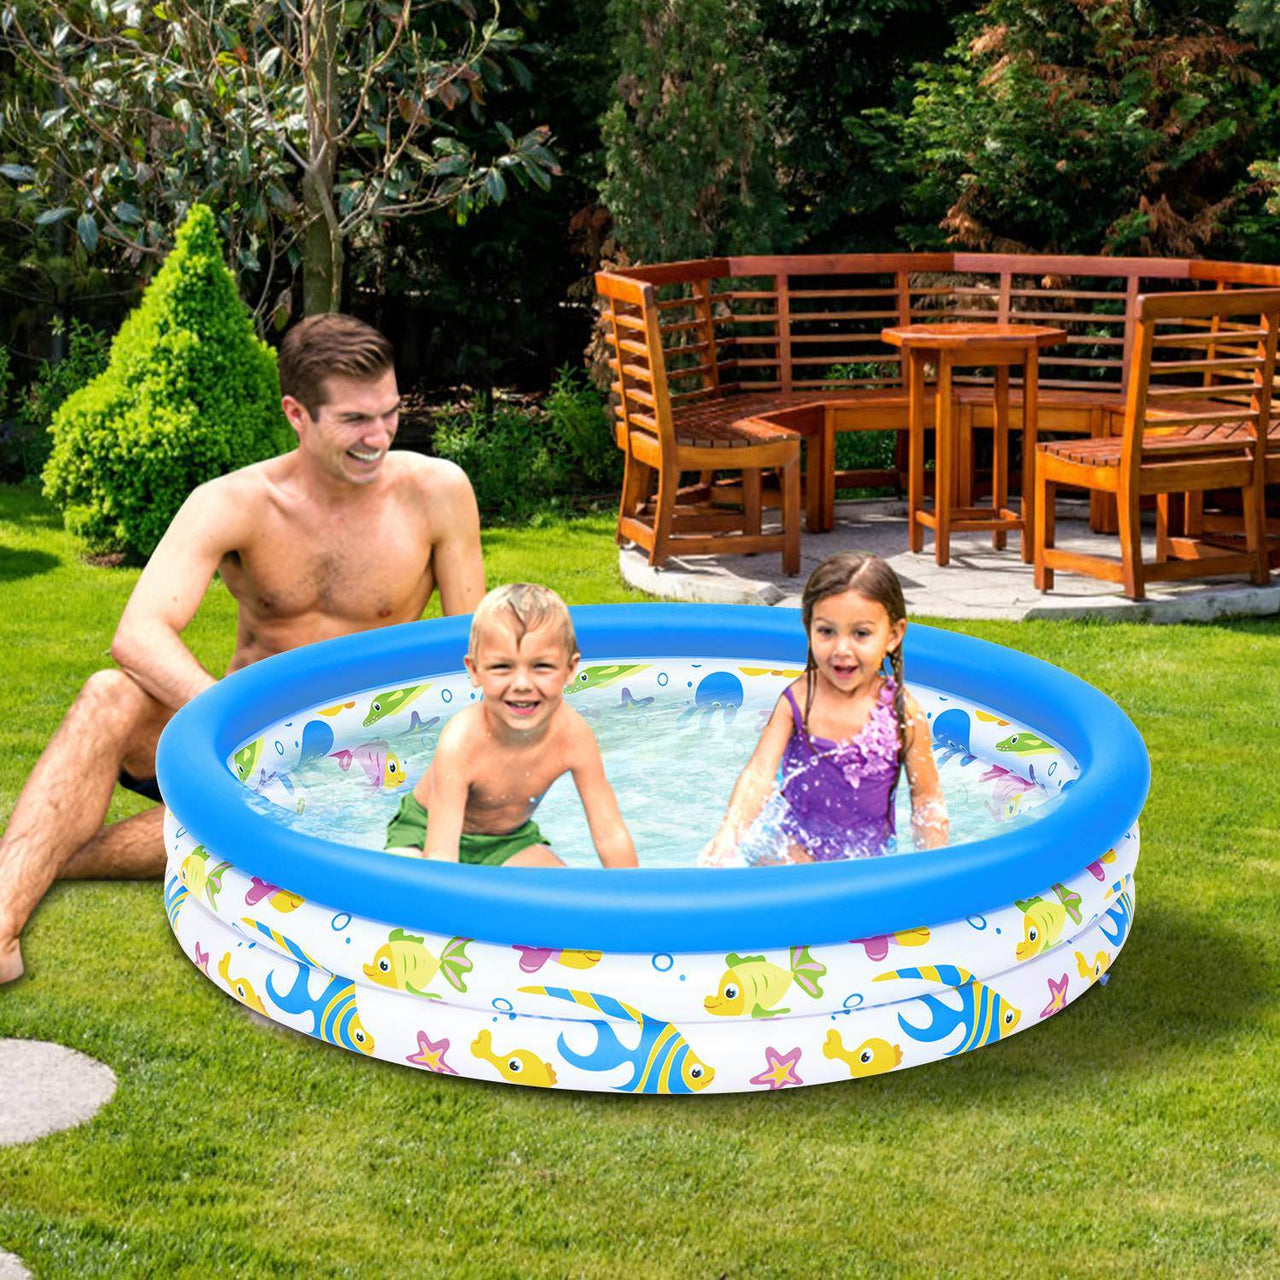 48x10In Inflatable Swimming Pool Blow Up Family Pool For 2 Kids Foldable Swim Ball Pool Center